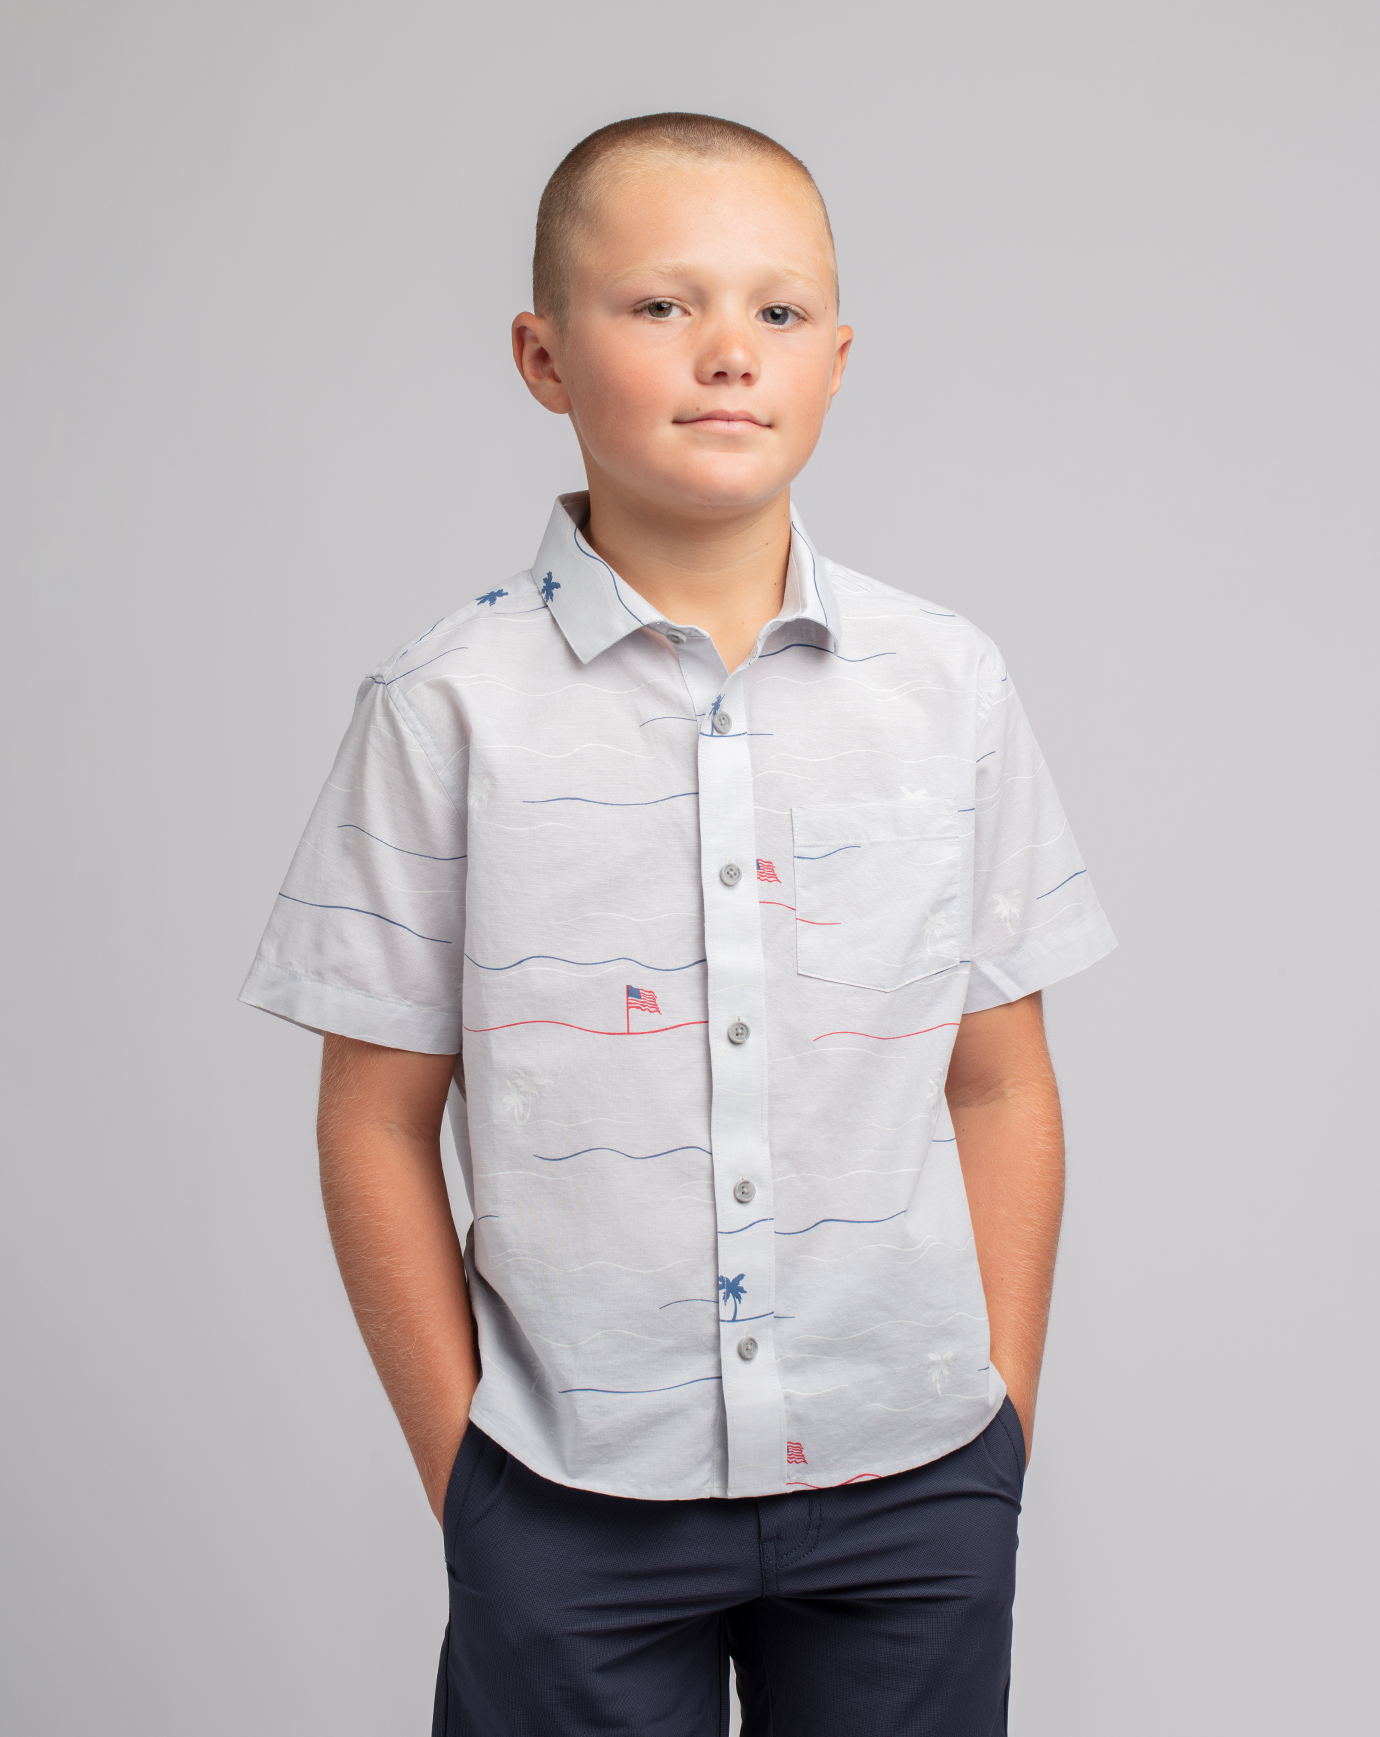 STAR SPANGLED BANNER YOUTH BUTTON-UP 1